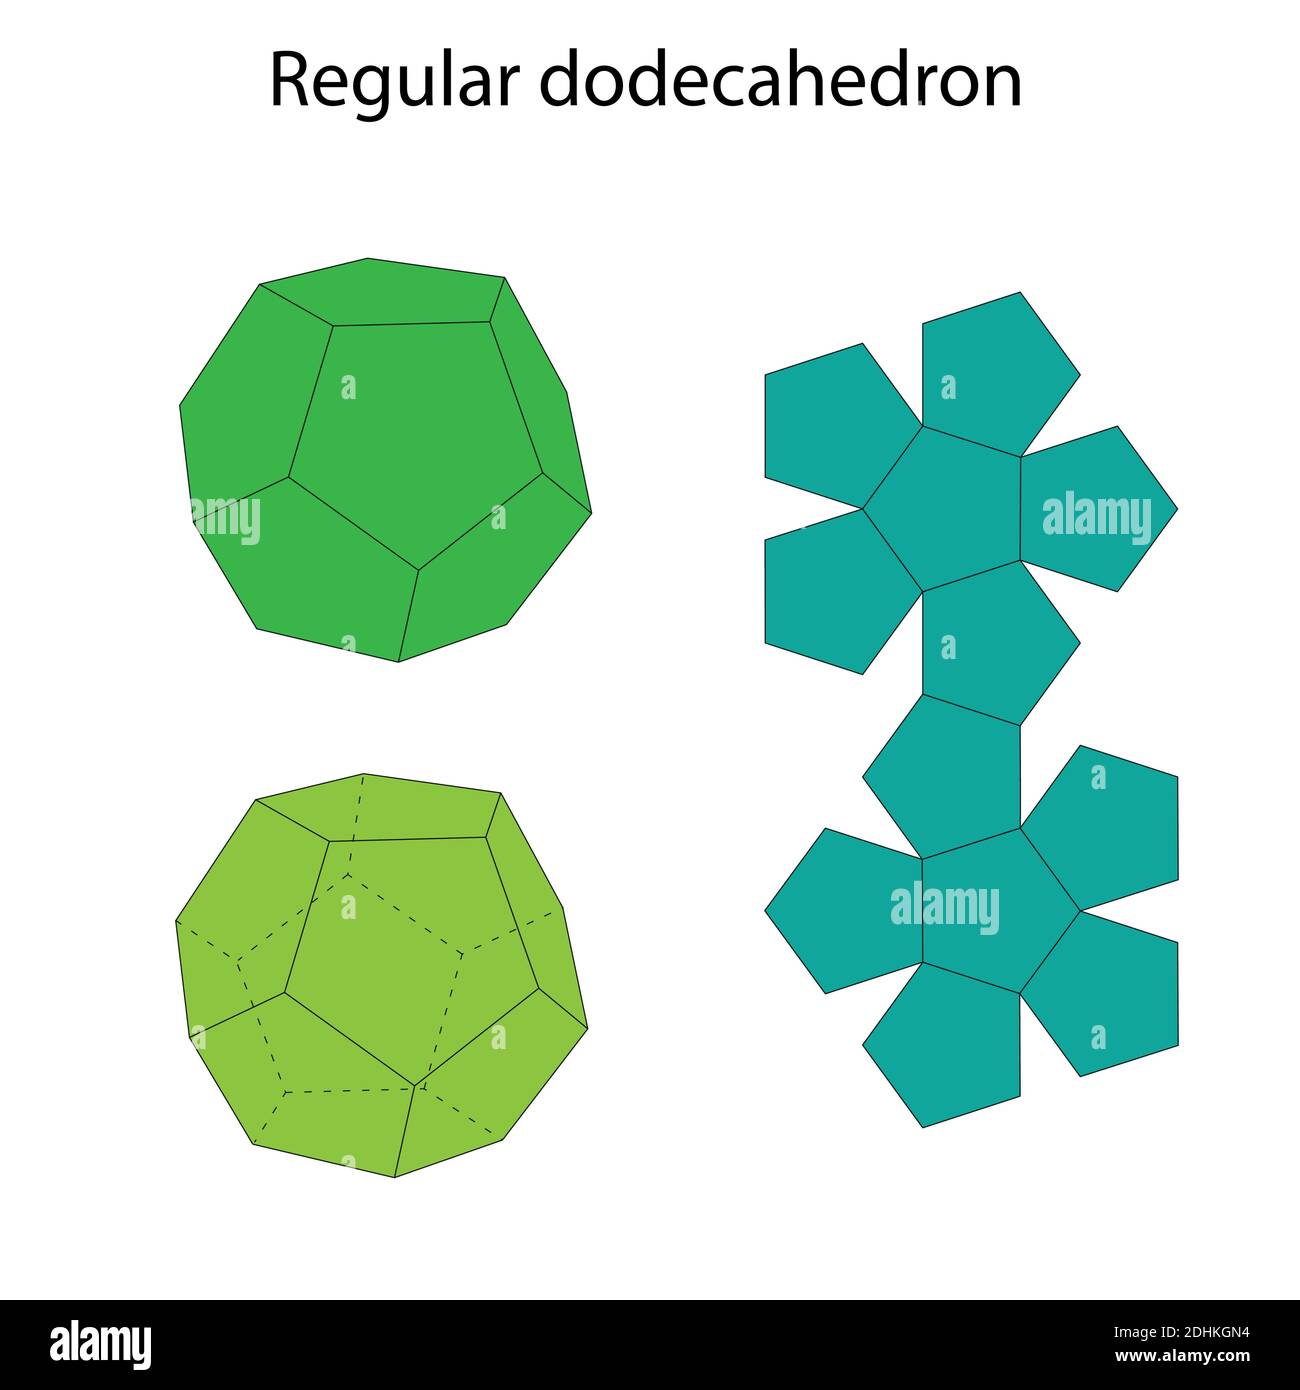 Dodecahedron with net. Regular polyhedron. Vector illustration. Stock Vector